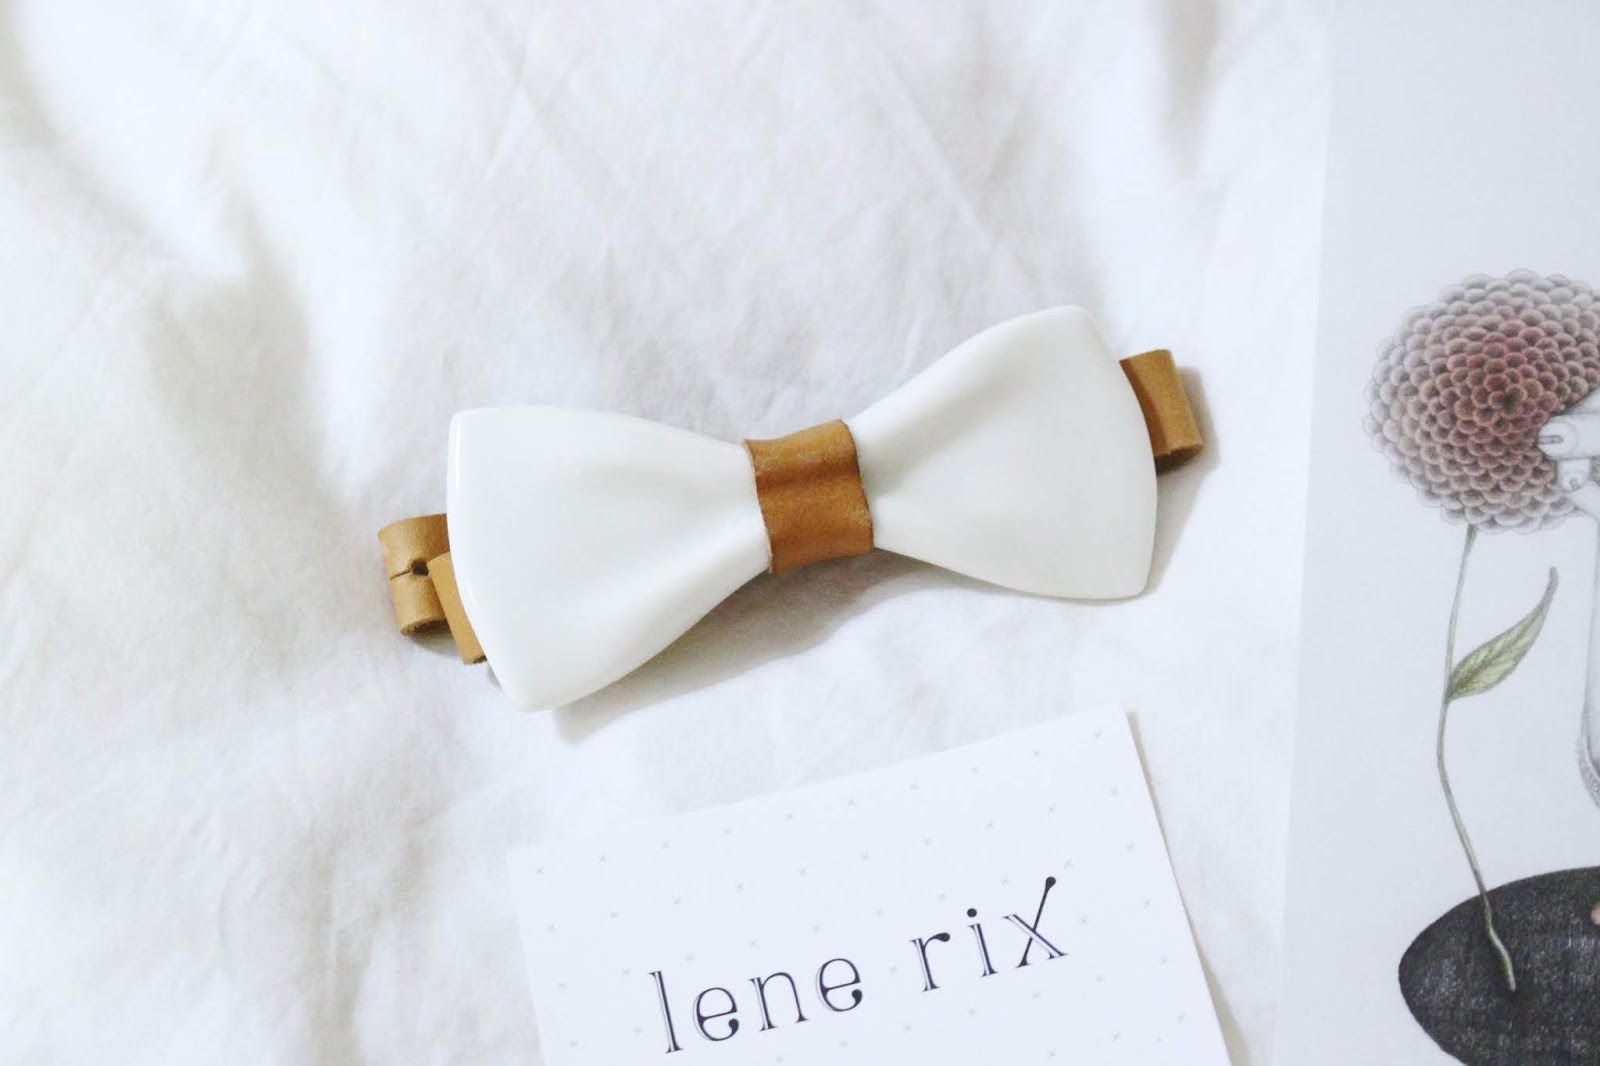 Introducing The New Bowtie Trend - Porcelain Bowtie from Lene Rix 